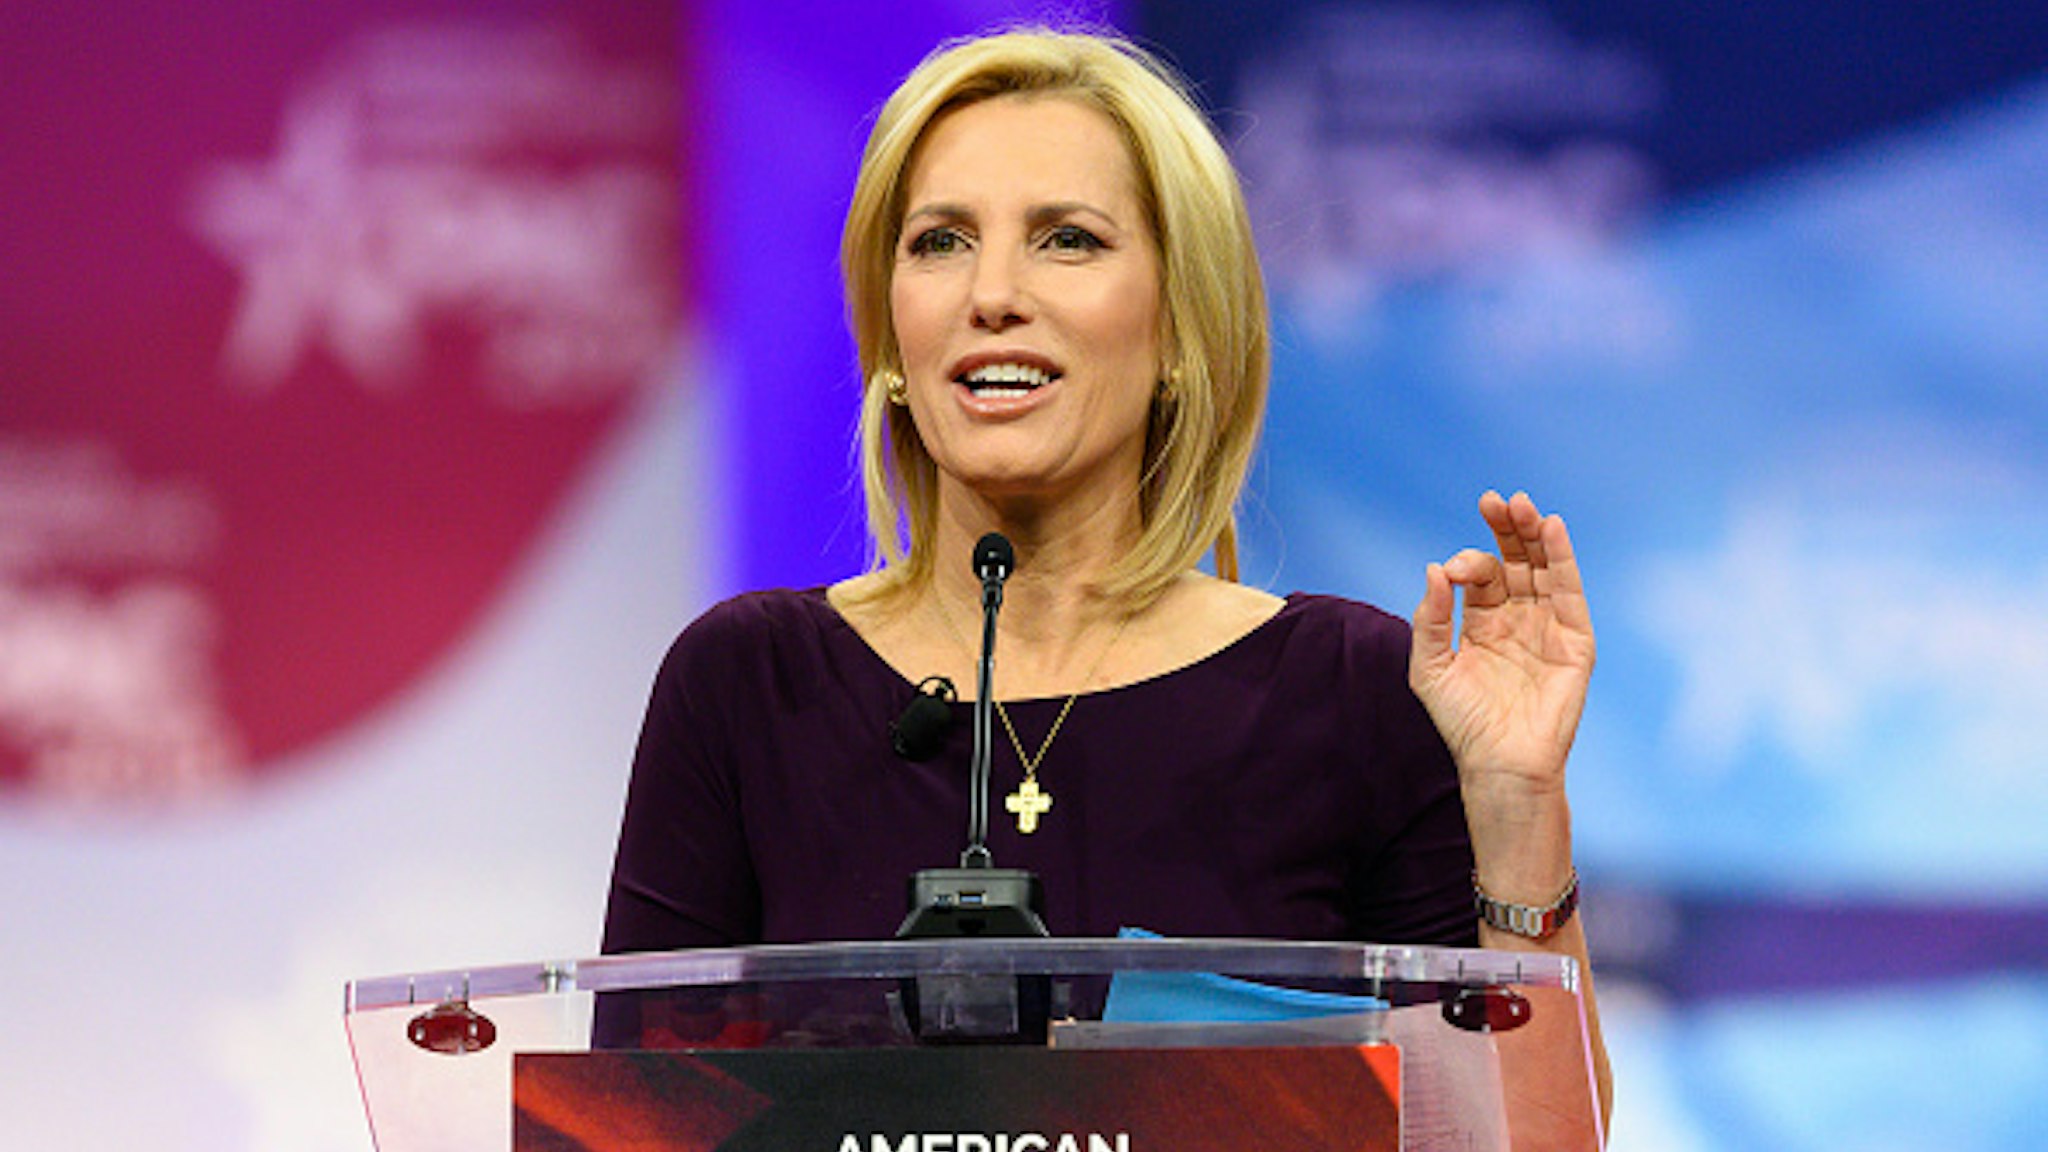 OXON HILL, MD, UNITED STATES - 2019/02/28: Laura Ingraham, host of The Ingraham Angle on Fox News Channel, seen speaking during the American Conservative Union's Conservative Political Action Conference (CPAC) at the Gaylord National Resort &amp; Convention Center in Oxon Hill, MD.